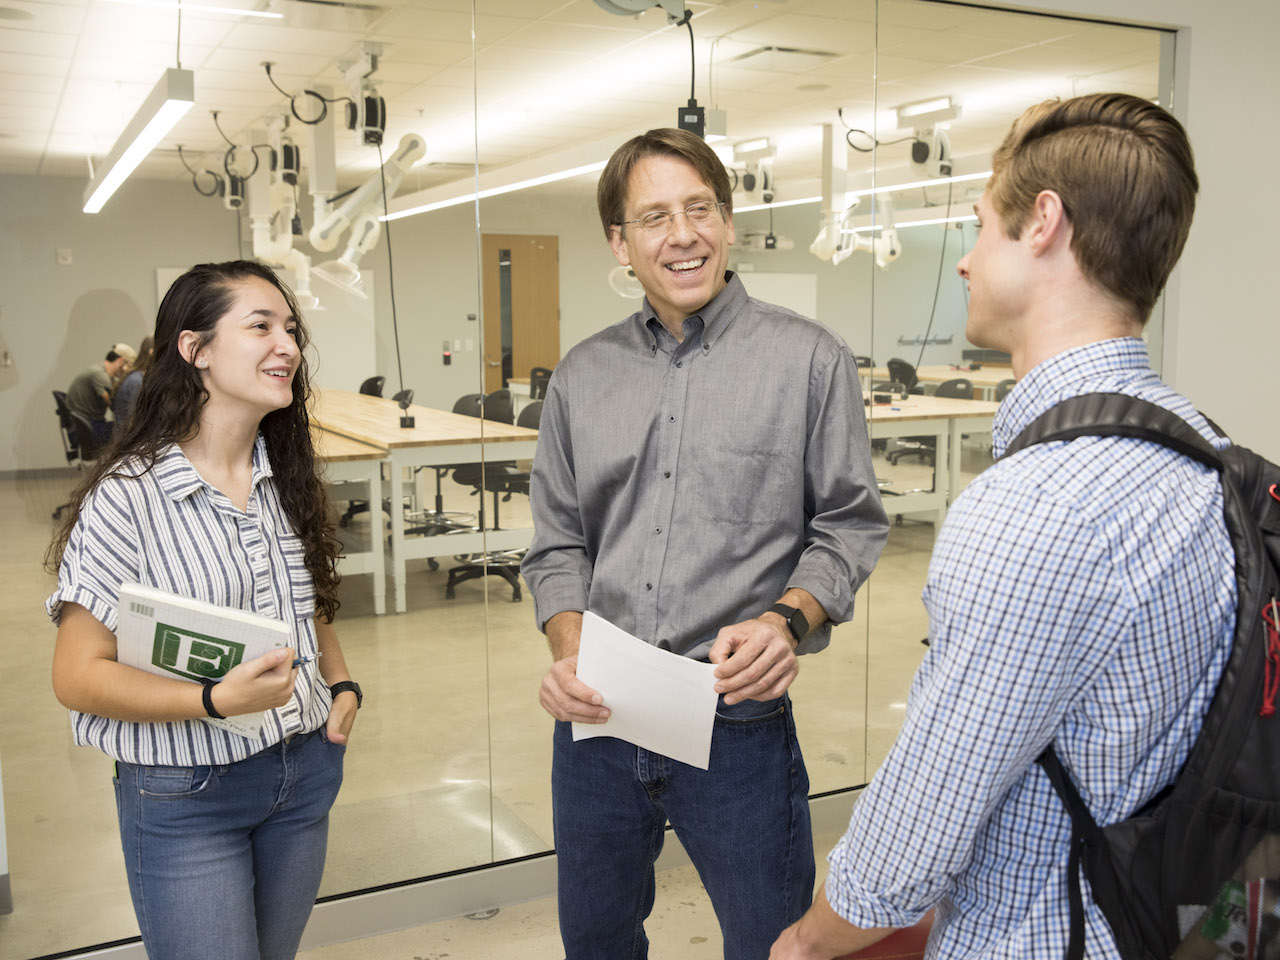 Professor talking to two students